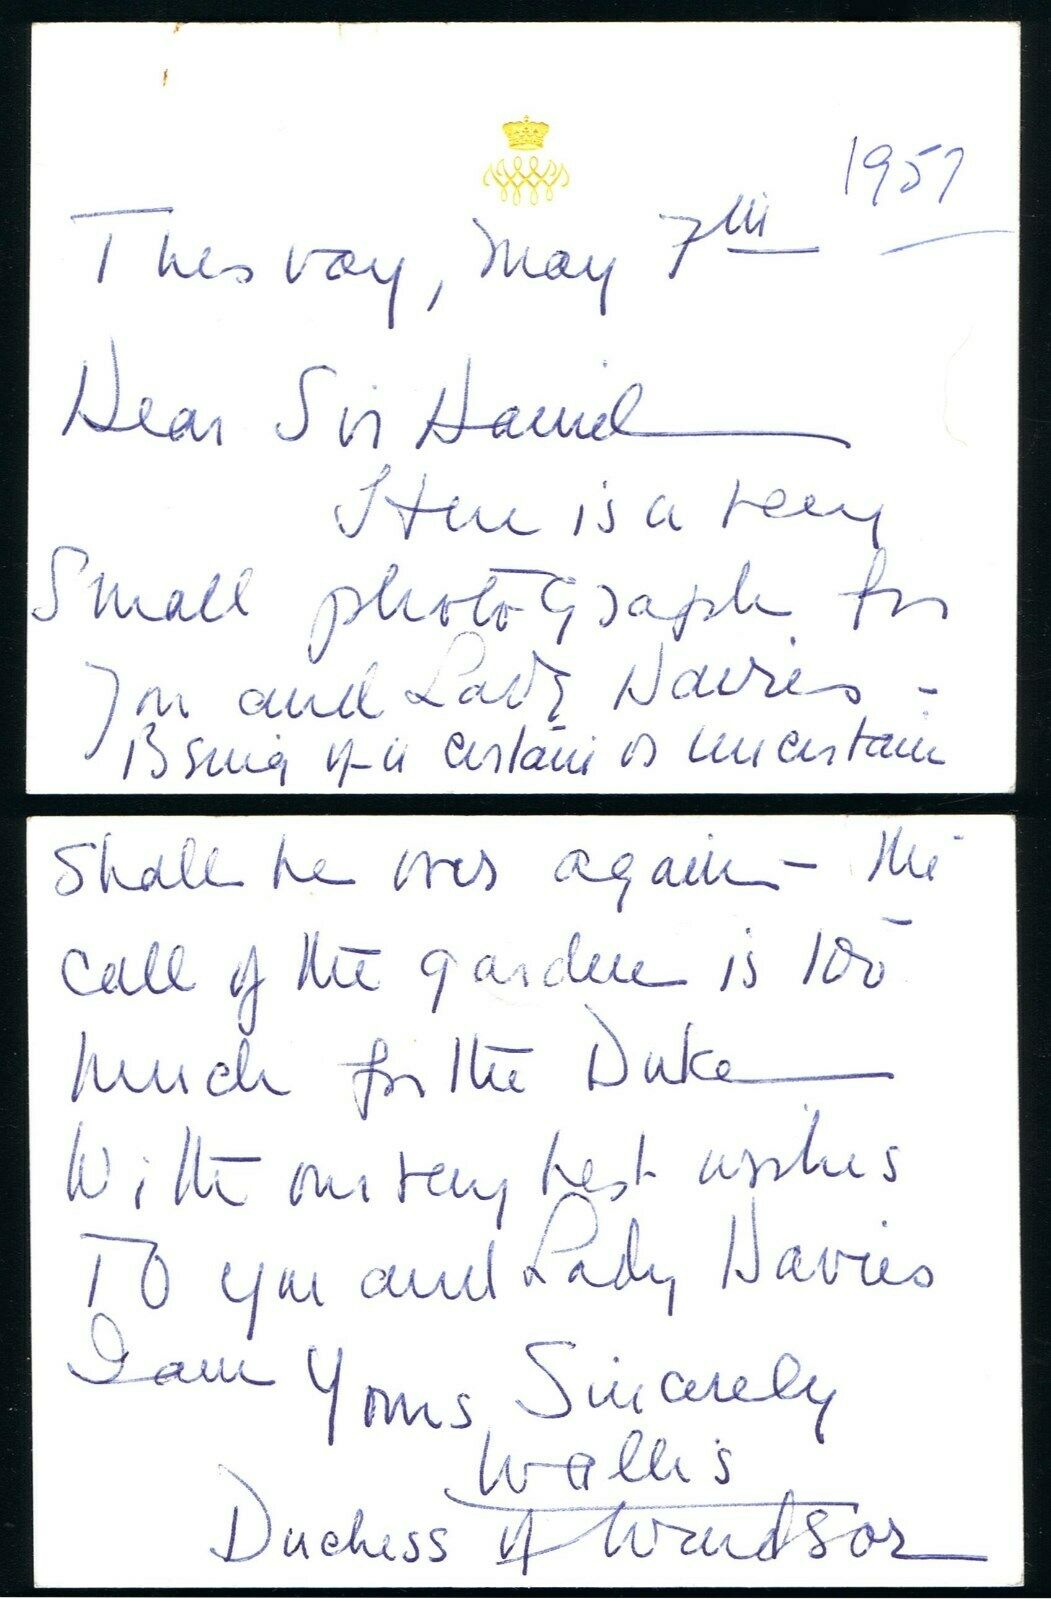 Royalty Duchess Of Windsor (Wallis Simpson) Two Embossed Cards Handwritten In Biro Note From The Duc - Image 2 of 4